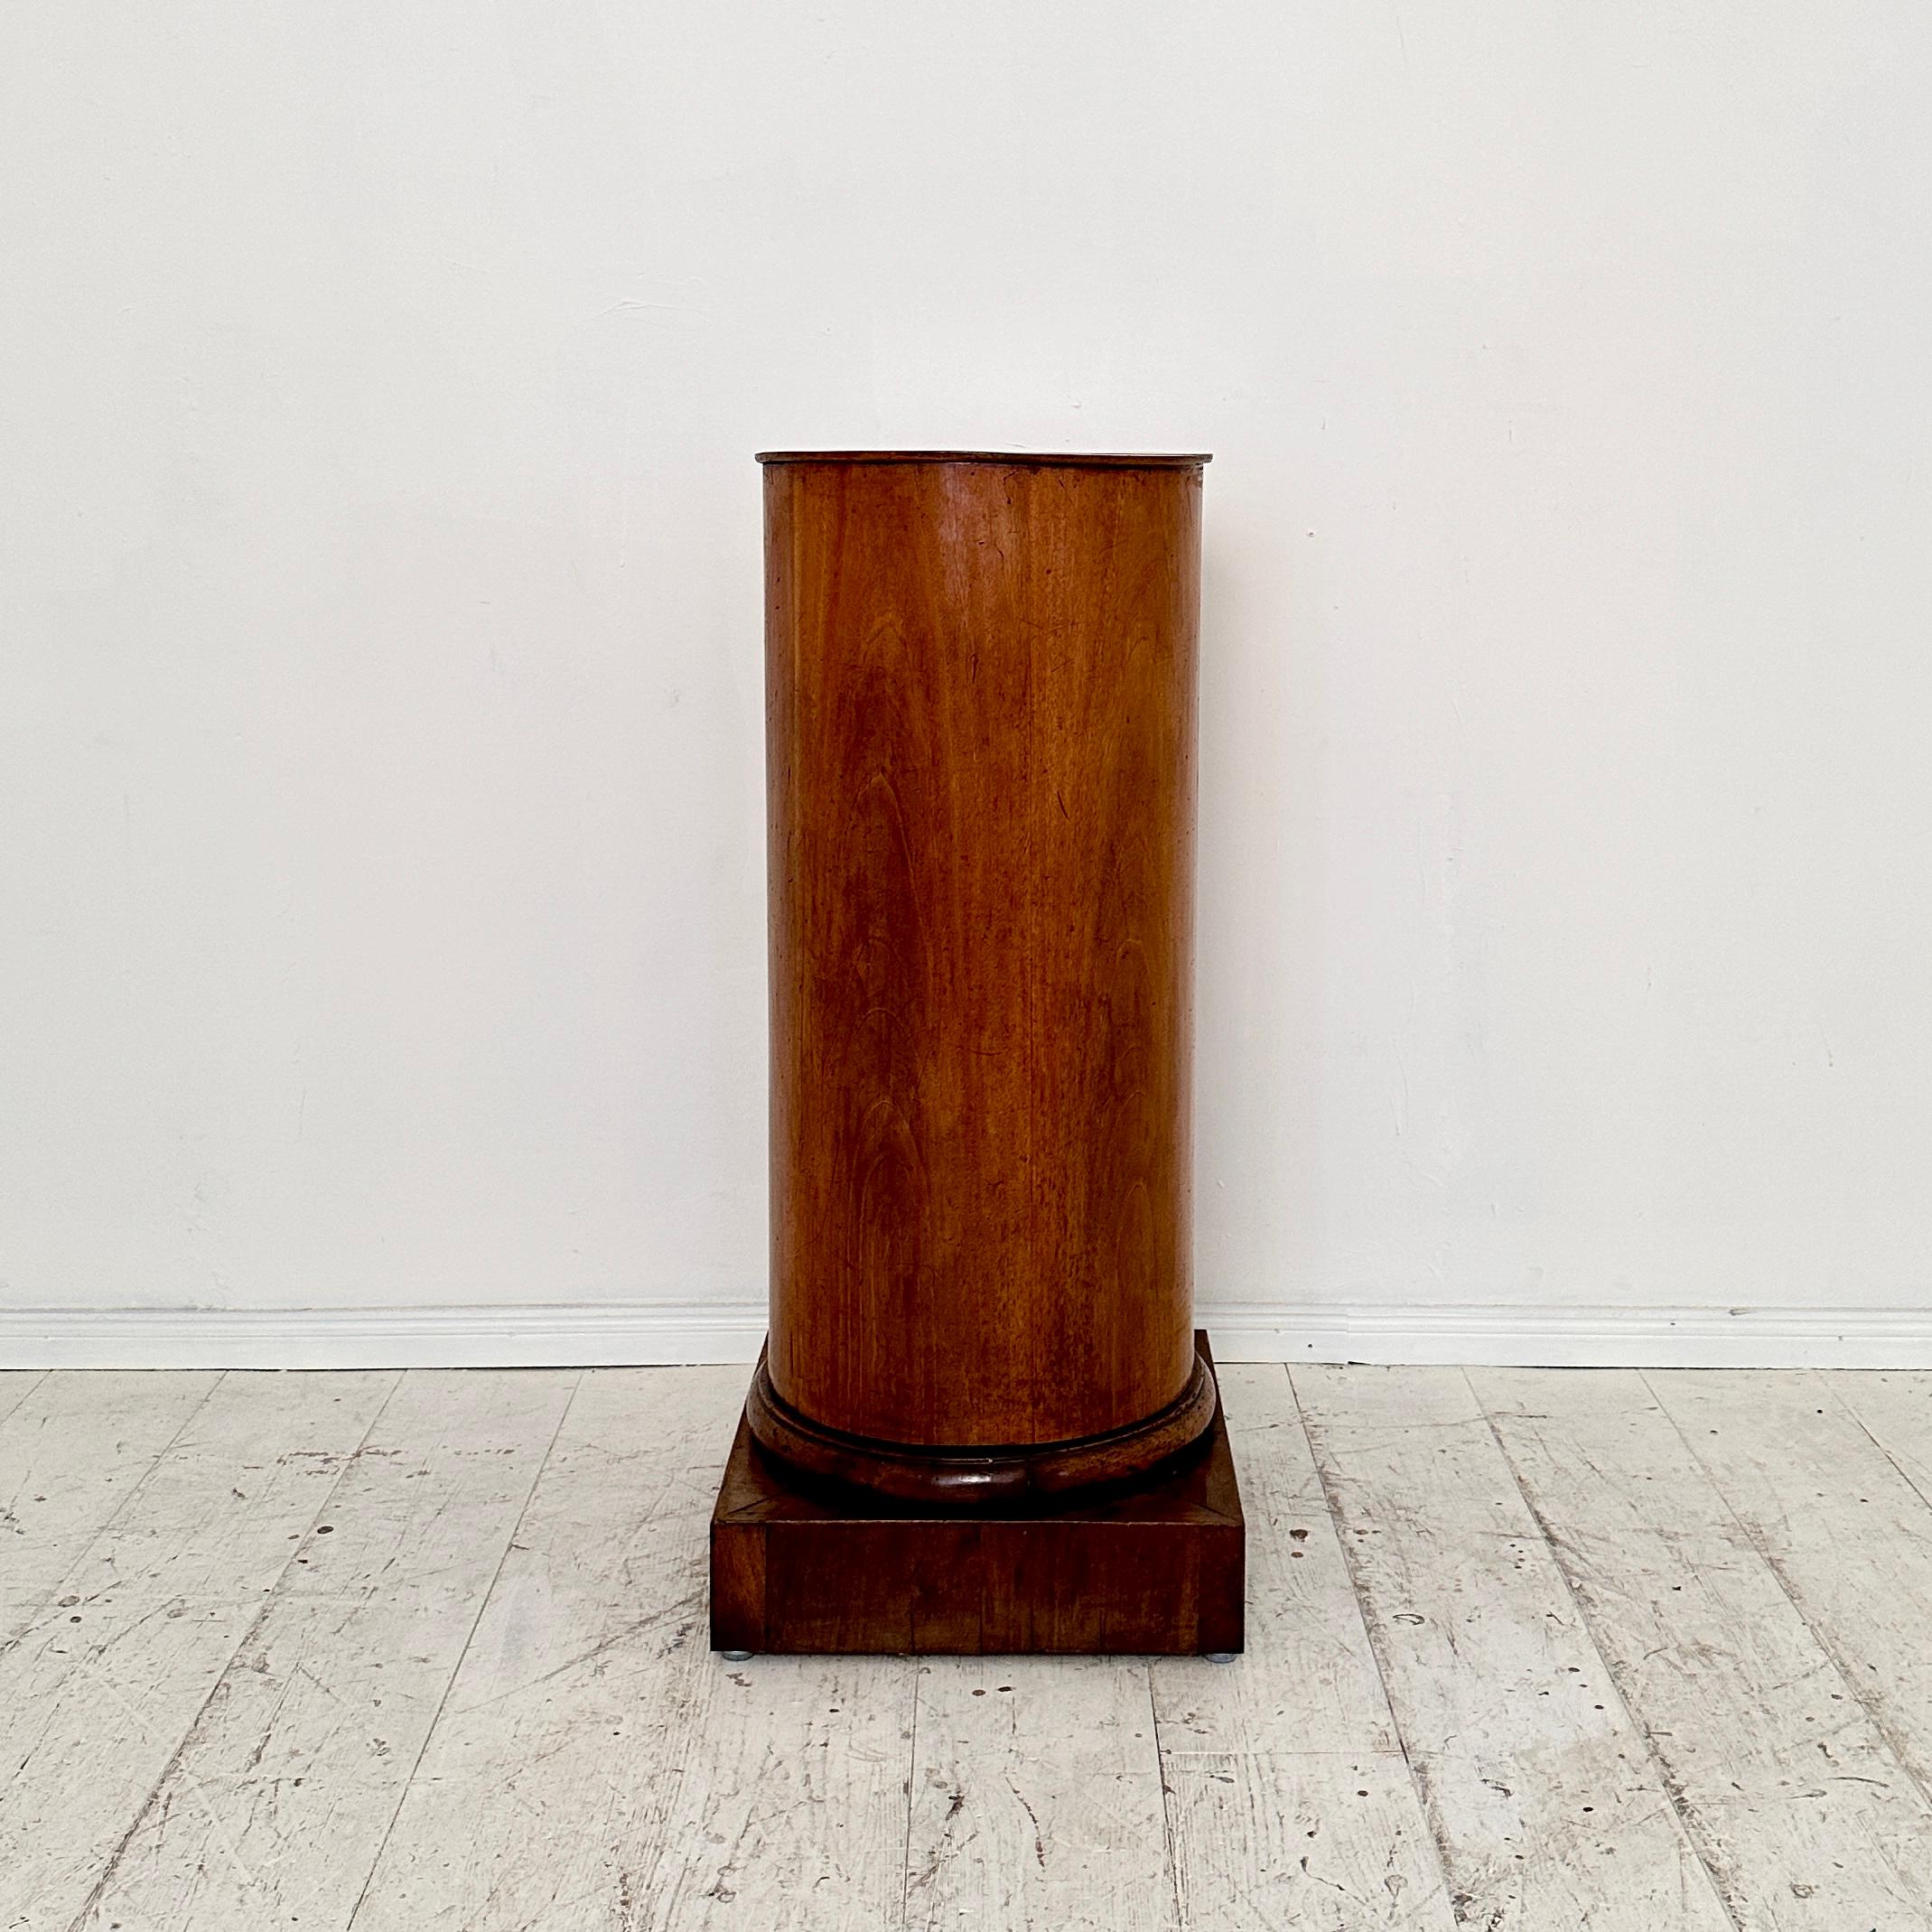 Crafted around 1820, these Rare 19th Century German Biedermeier Column in Walnut are exquisite examples of the era's craftsmanship and aesthetic sensibility. Standing as elegant symbols of Biedermeier style, these columns boast a rich walnut hue